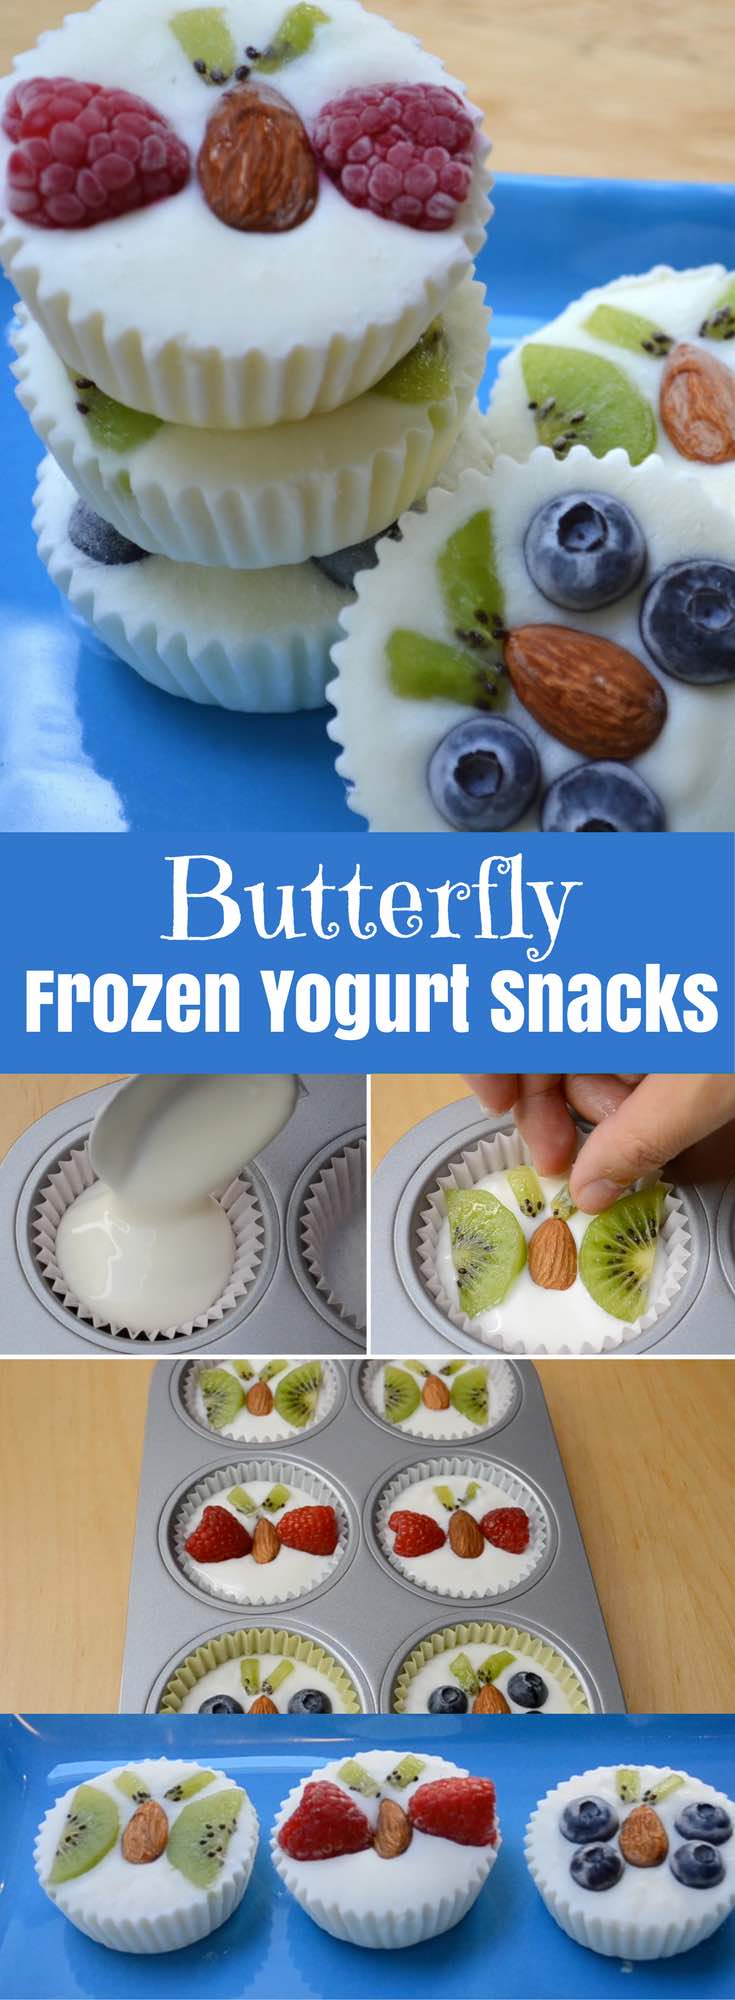 Healthy Fruity Frozen Yogurt Snacks – An easy and refreshing dessert that’s good for you. A fun way to enjoy FroYo! These creamy frozen yogurt bites come with fruits shaped into butterflies. All you need is your favorite yogurt, some fruits and almonds. So delicious and so fun! Quick and easy recipe. Kids friendly. Video recipe. | Tipbuzz.com